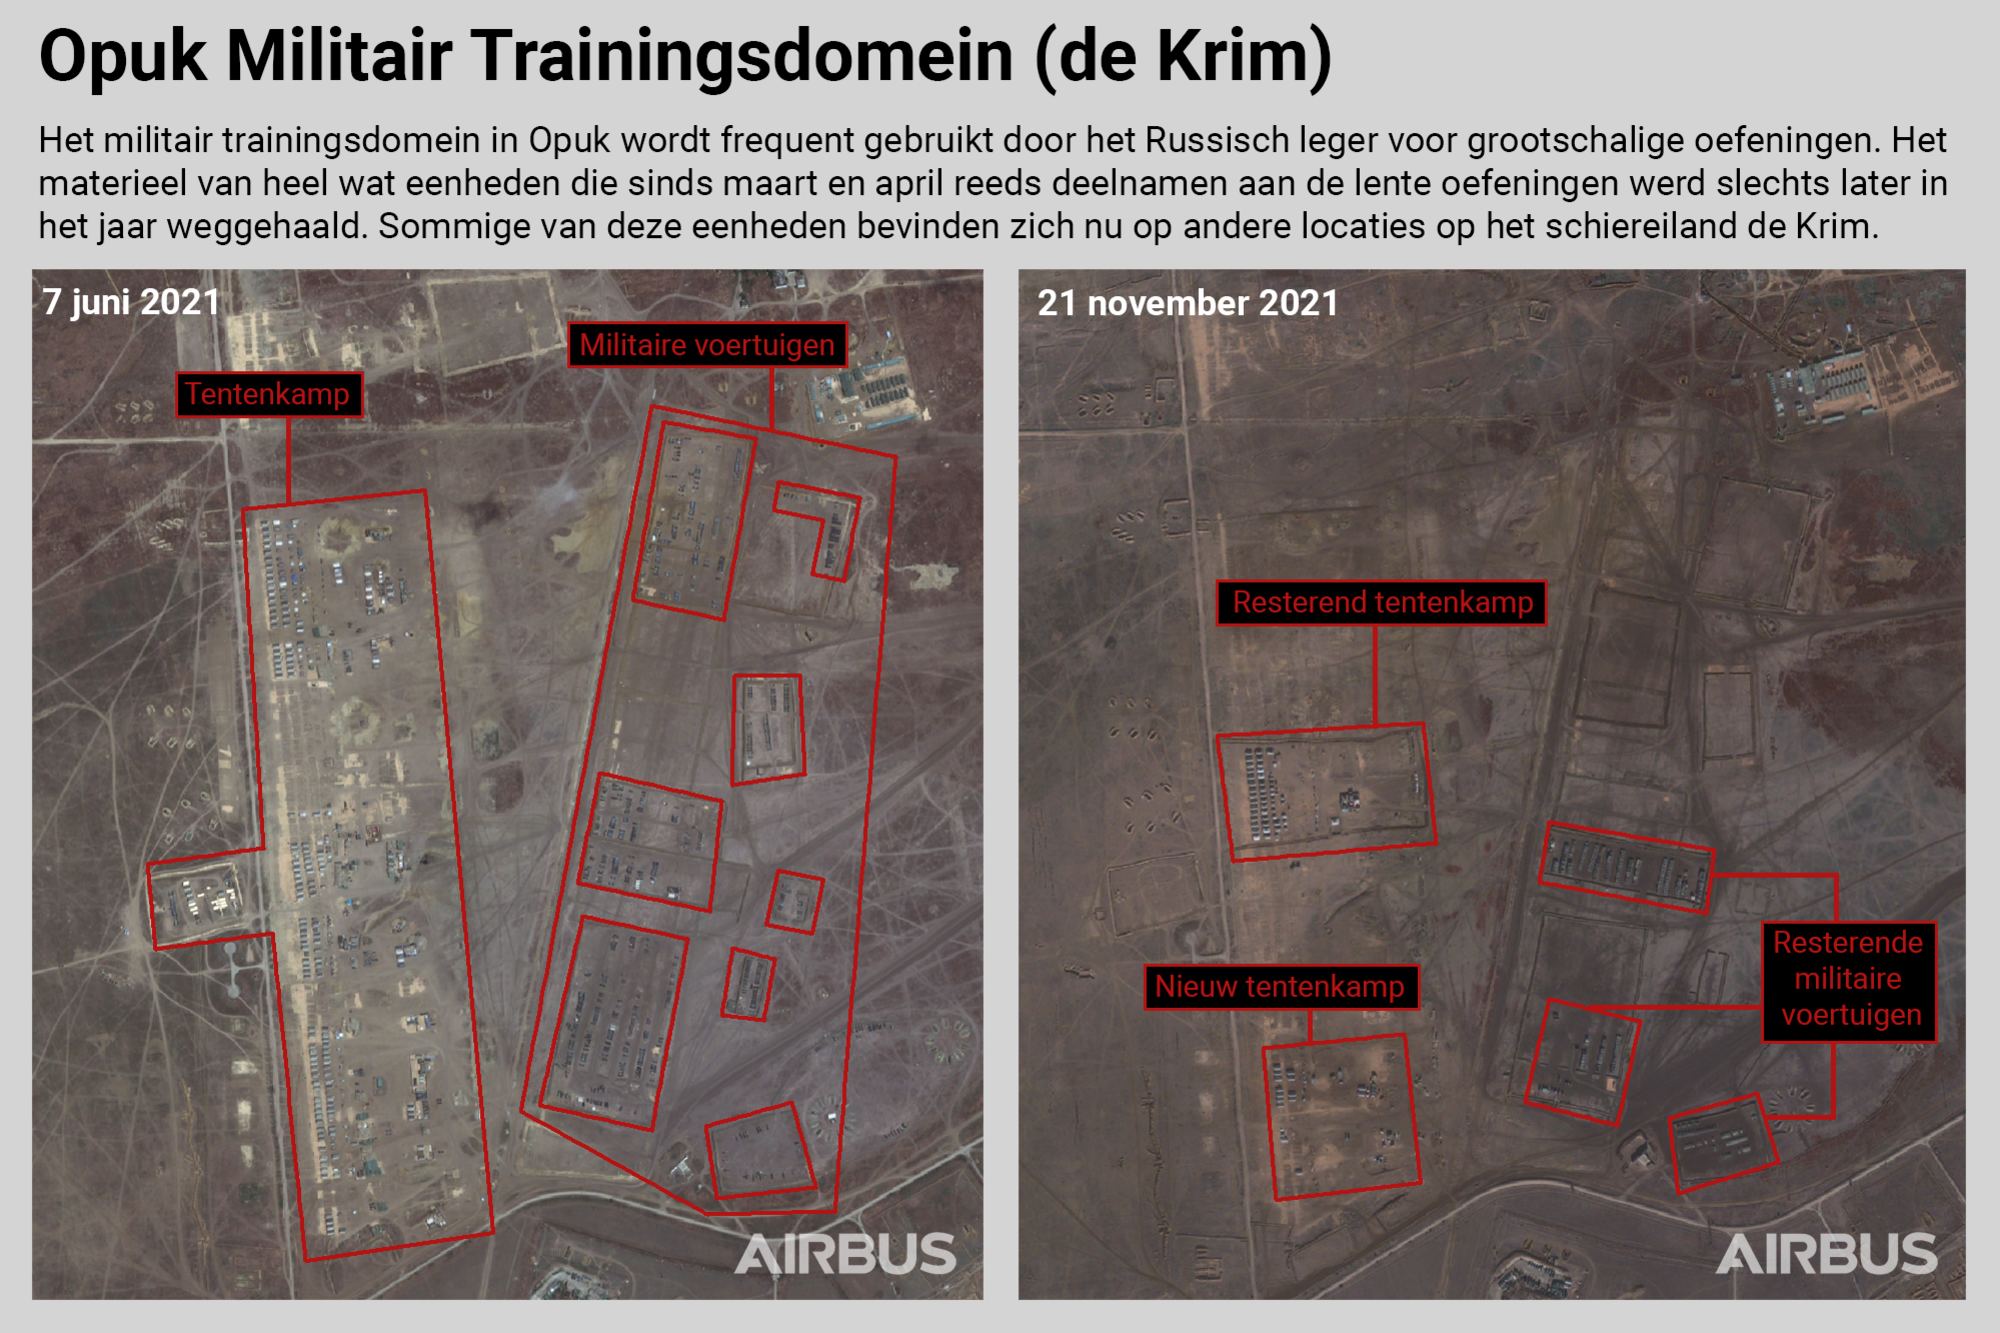 Satellietbeelden Opuk Militair Trainingsdomein op de Krim, Includes material © CNES 2021, Distribution Airbus DS all rights reserved